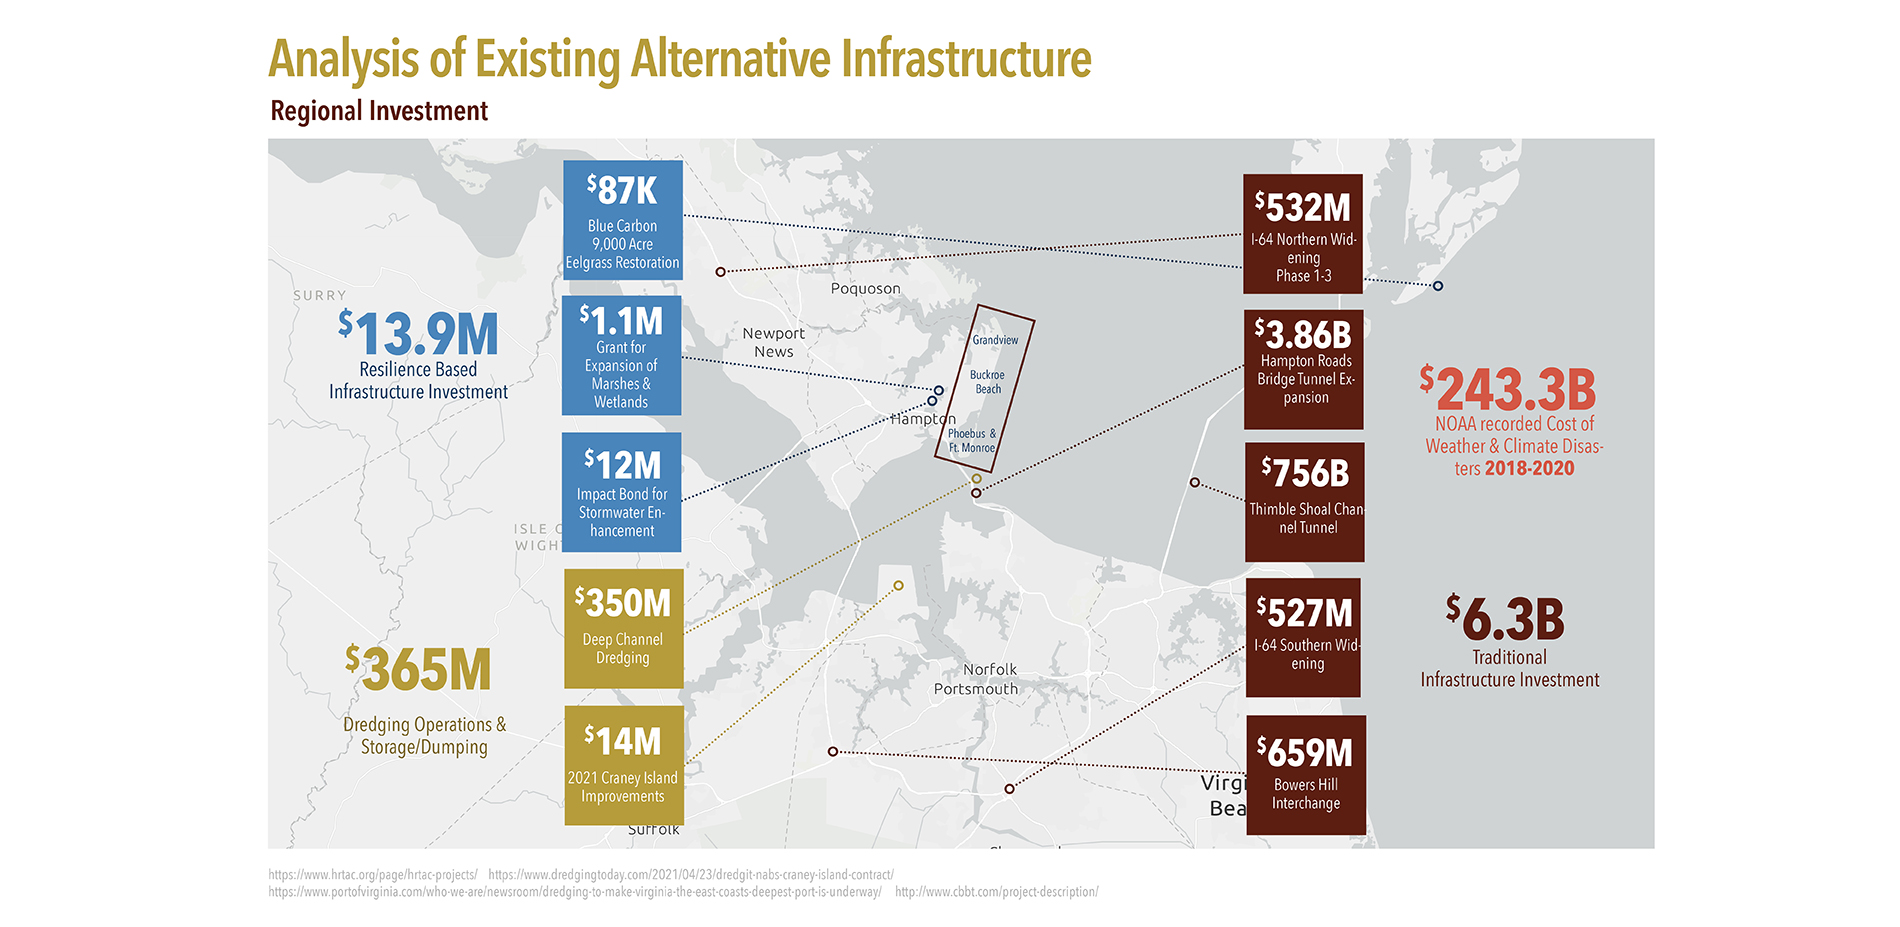 Analysis of Existing Alternative Infrastructure